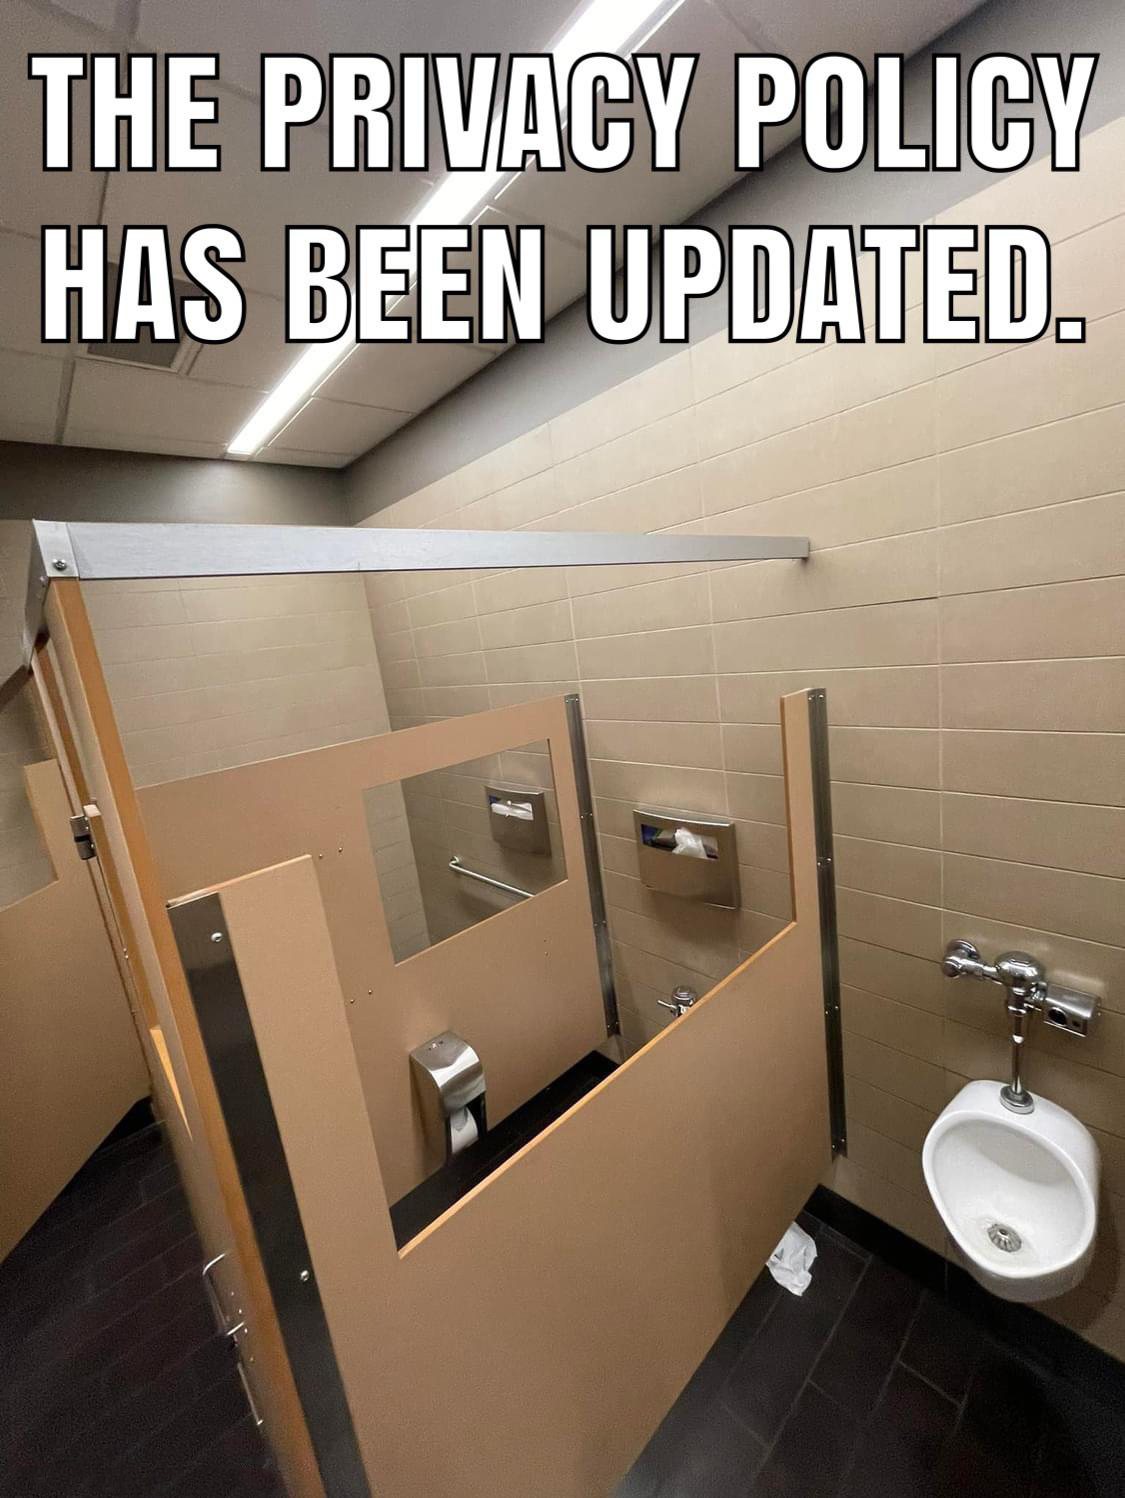 daily dose of pics and memes - toilet - The Privacy Policy Has Been Updated.